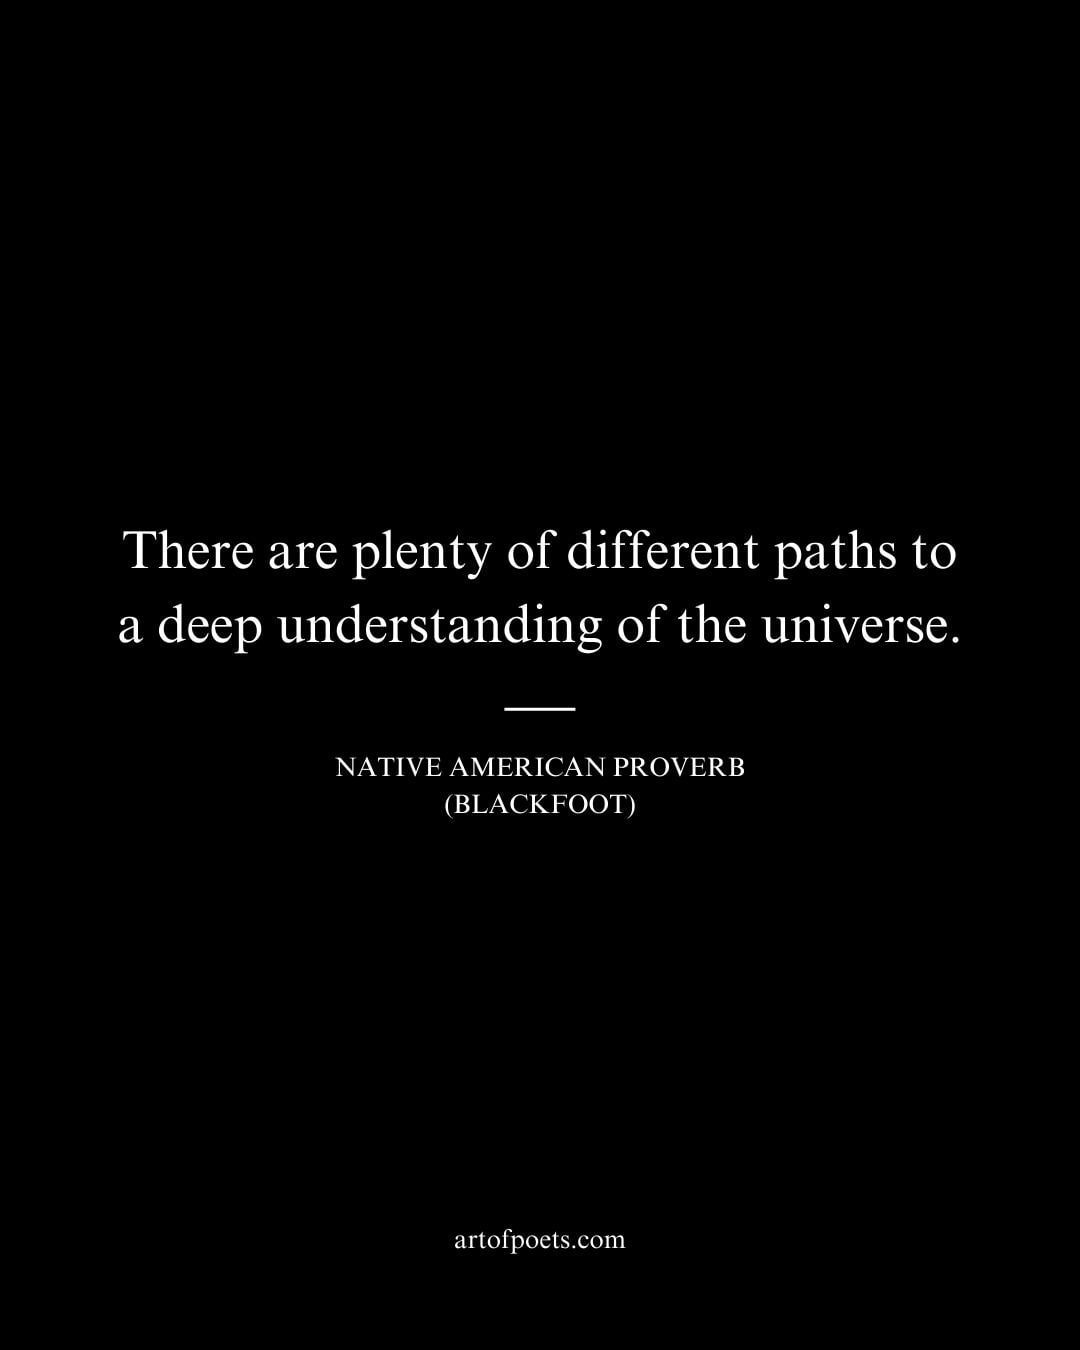 There are plenty of different paths to a deep understanding of the universe